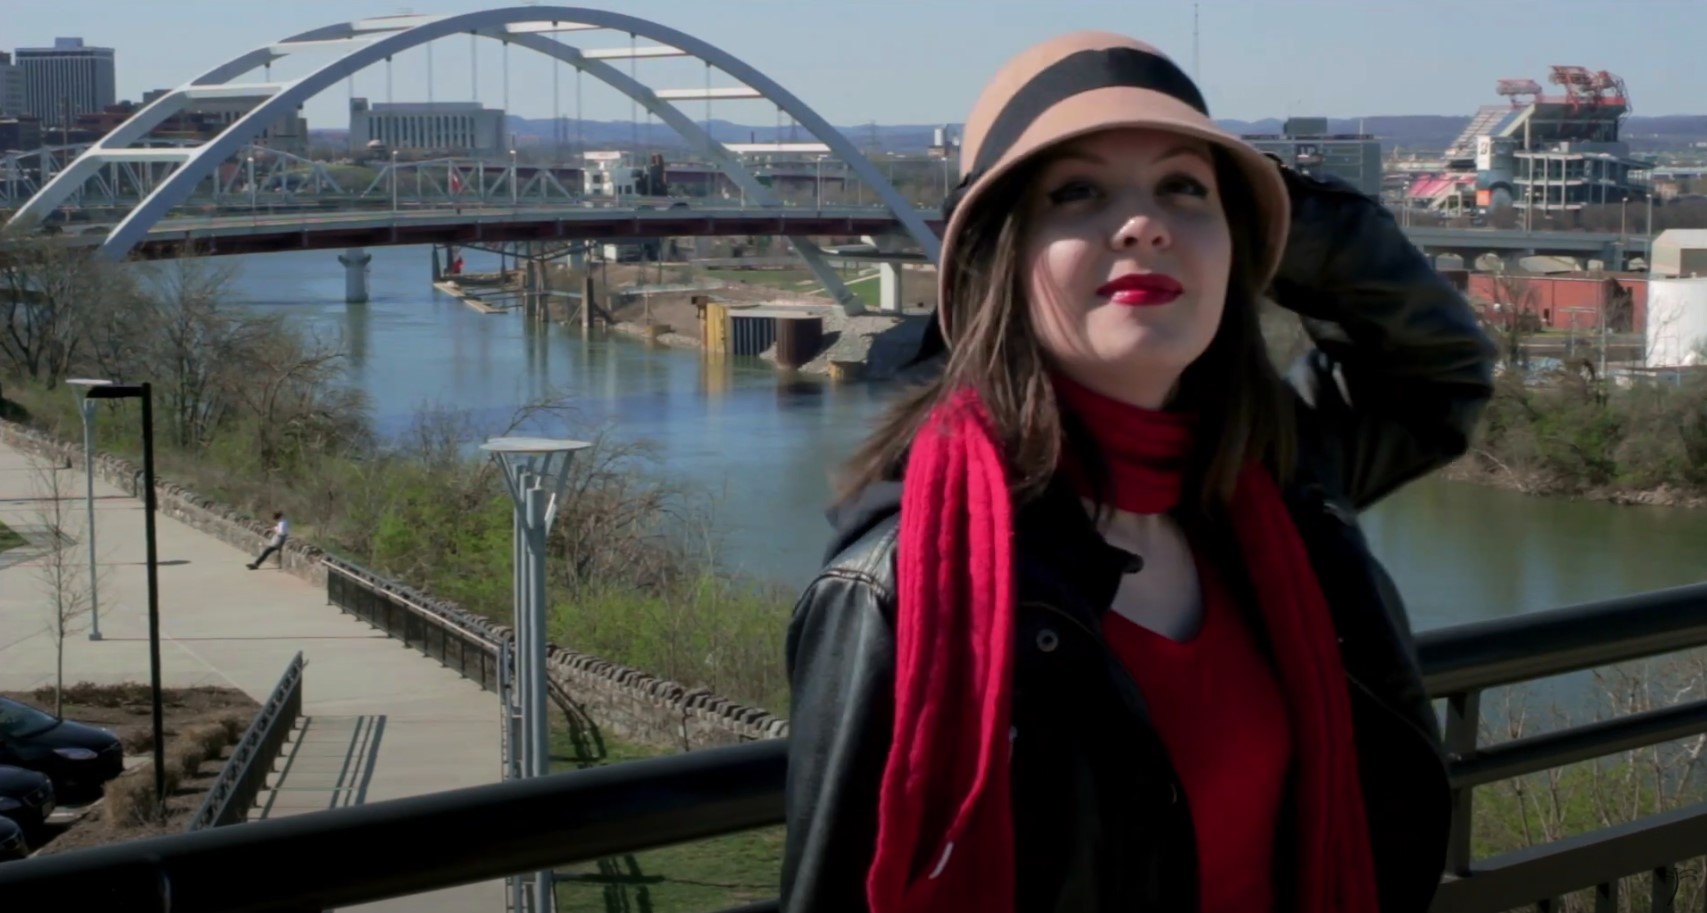 Whistling Dixie by Jo Rankin - Music Video - Filmed by Jackie Gamber